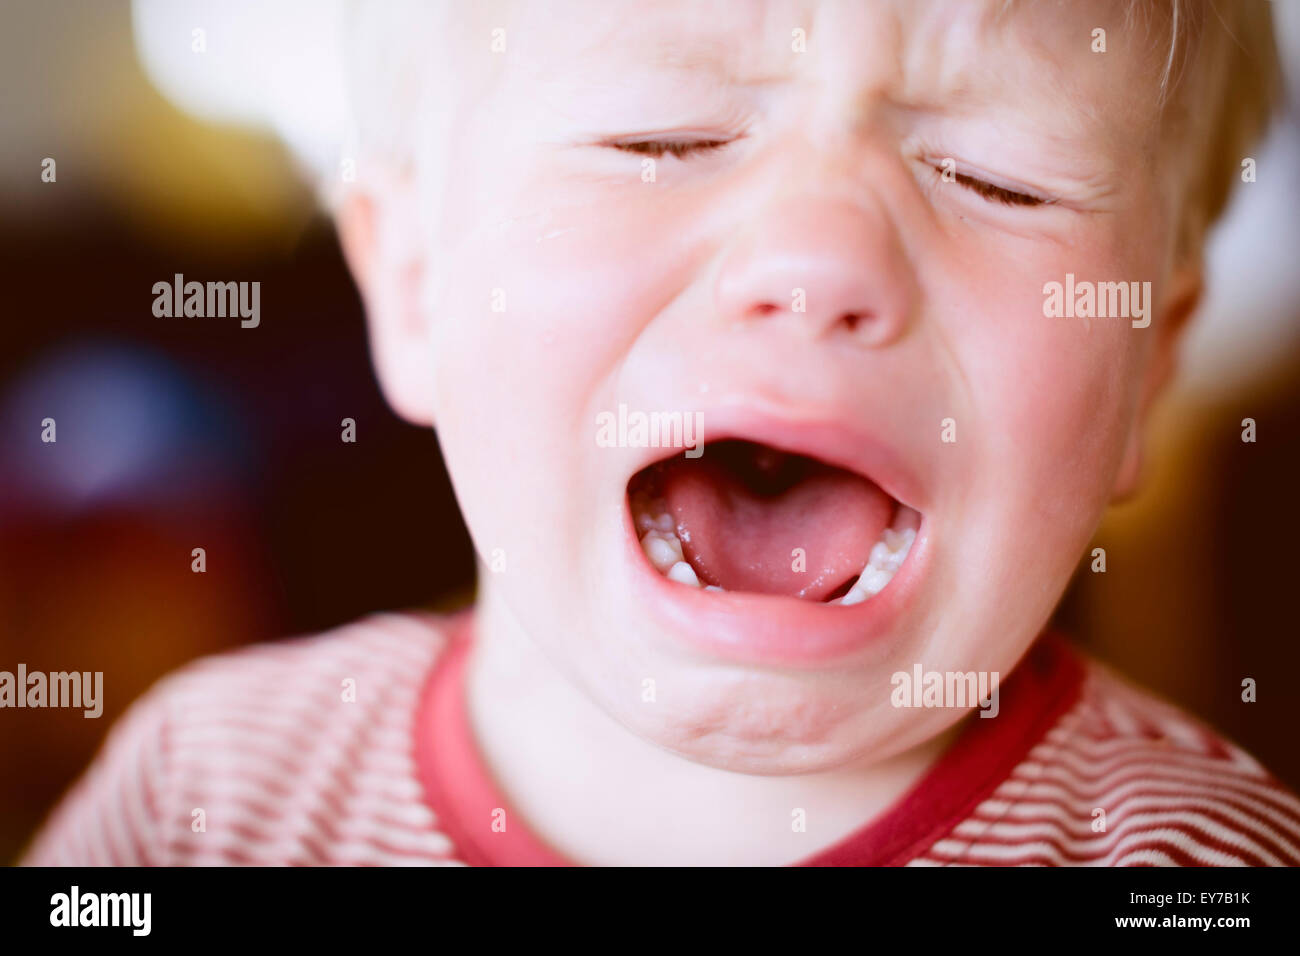 Young infant boy, 2 years, crying. Stock Photo